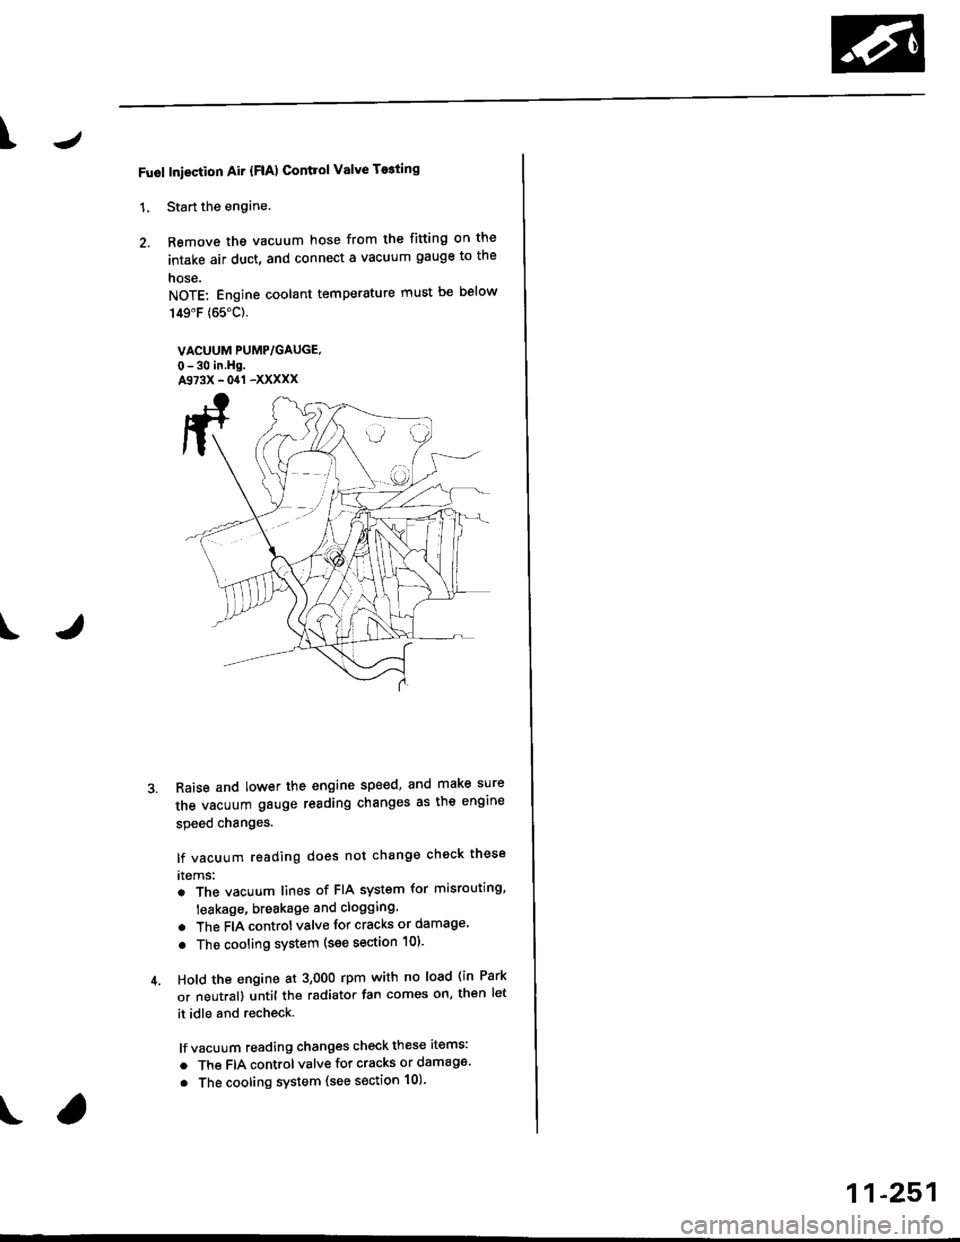 HONDA CIVIC 1997 6.G Workshop Manual \J
Fuol Iniection Air {FlA) Contlol Valve T$ting
1. Start the engine.
2. Remove the vacuum hose from the fitting on the
intake air duct, and connect a vacuum gauge to the
nose.
NOTE: Engine coolant te